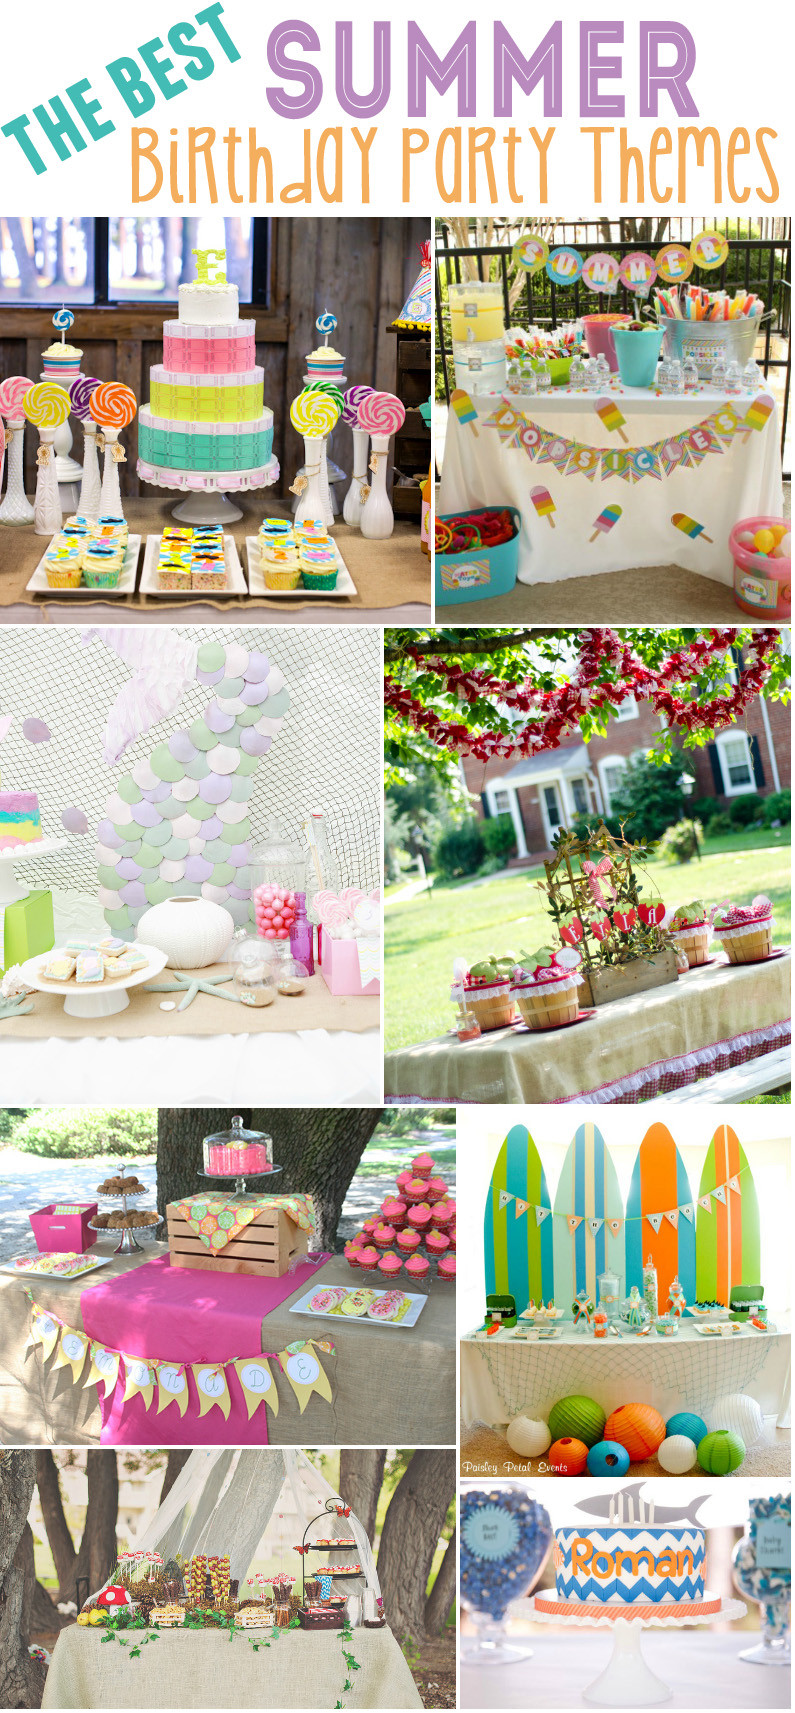 Fun Summer Party Themes
 15 Best Summer Birthday Party Themes Design Dazzle